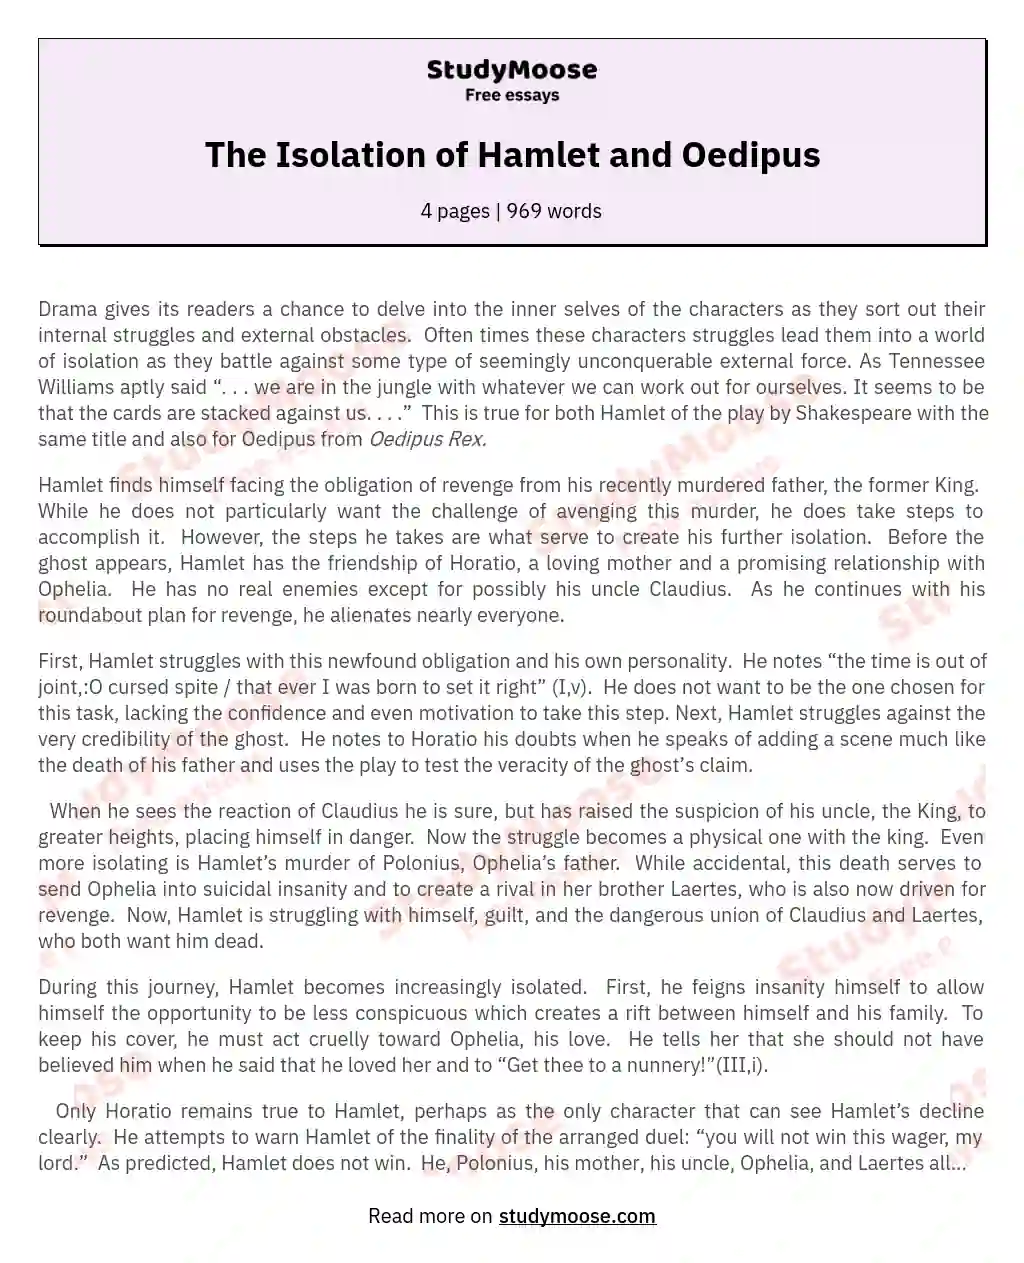 The Isolation of Hamlet and Oedipus essay